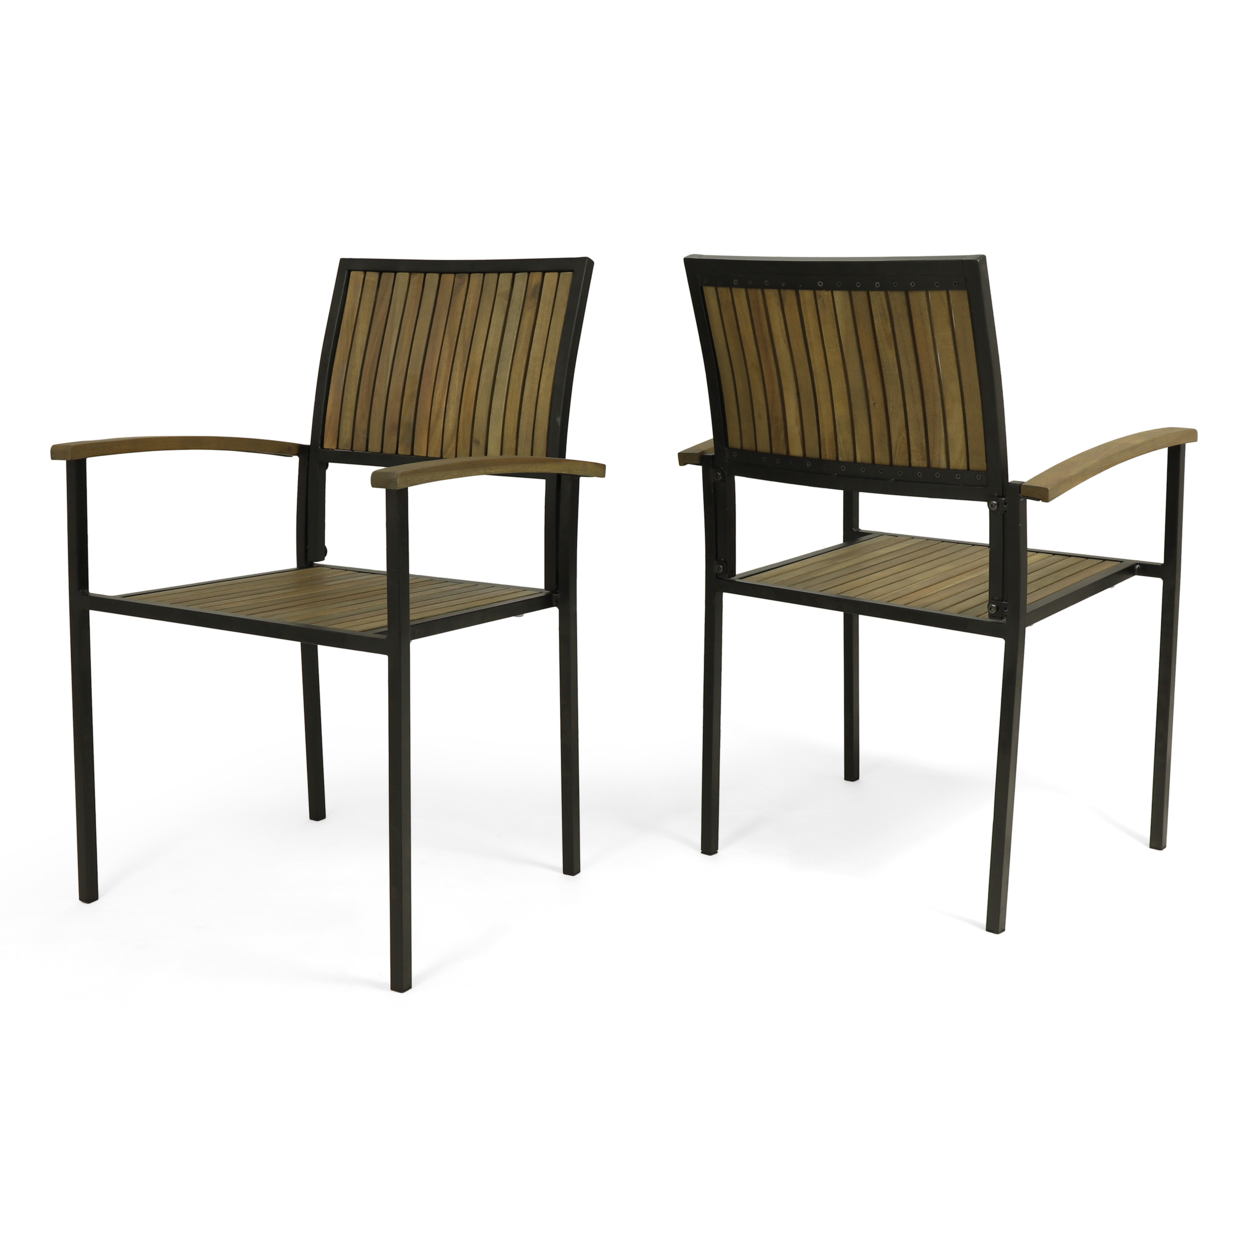 Owen Outdoor Wood And Iron Dining Chair (Set Of 2) - Gray Finish + Black Finish